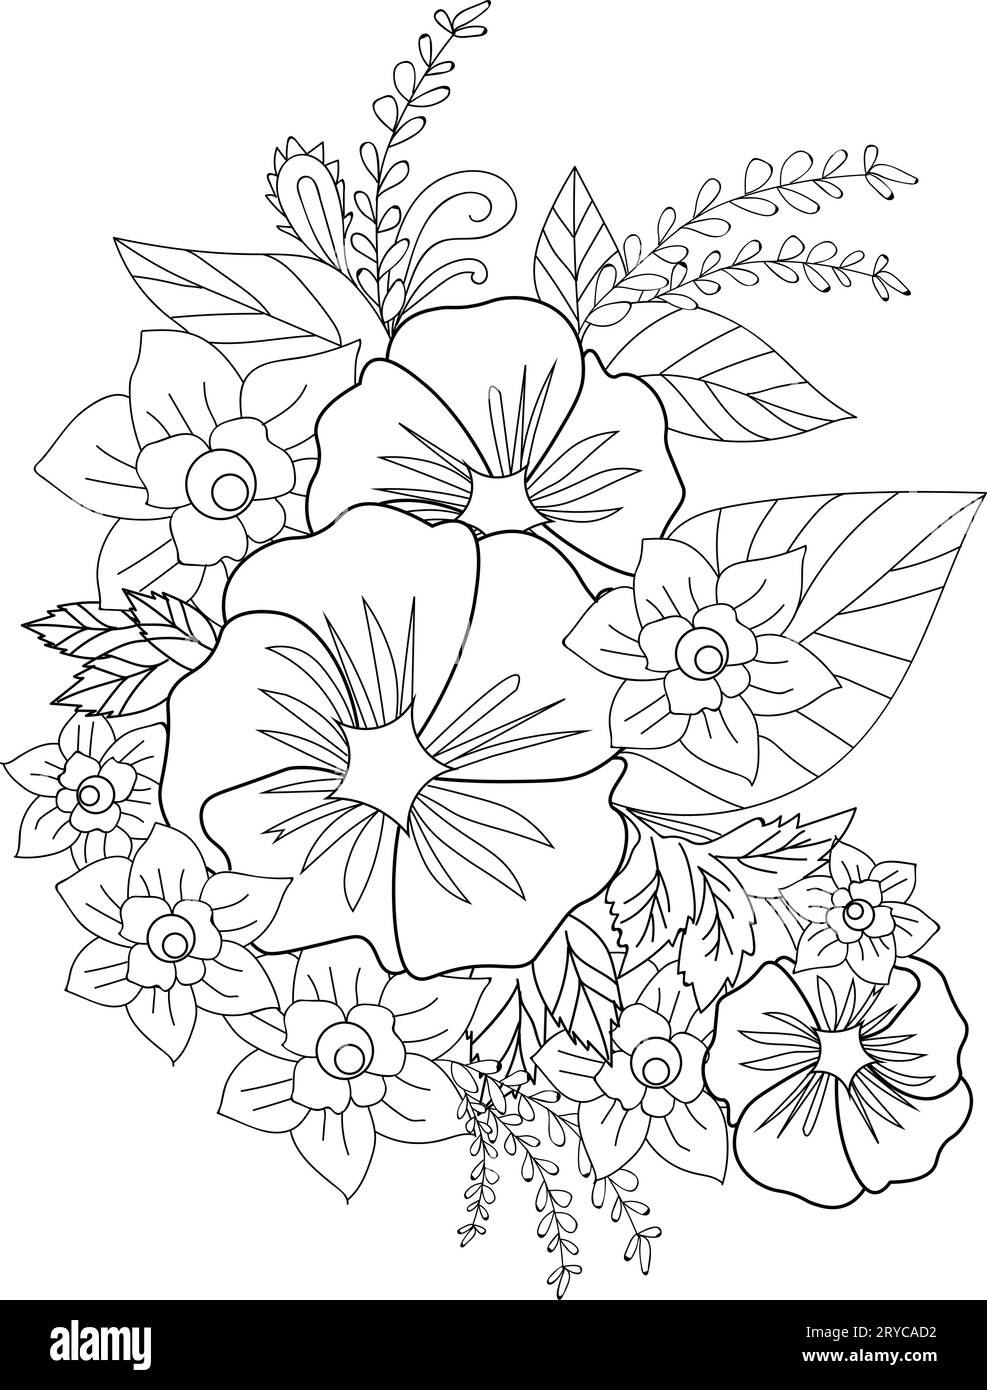 Henna flowers stock vector images